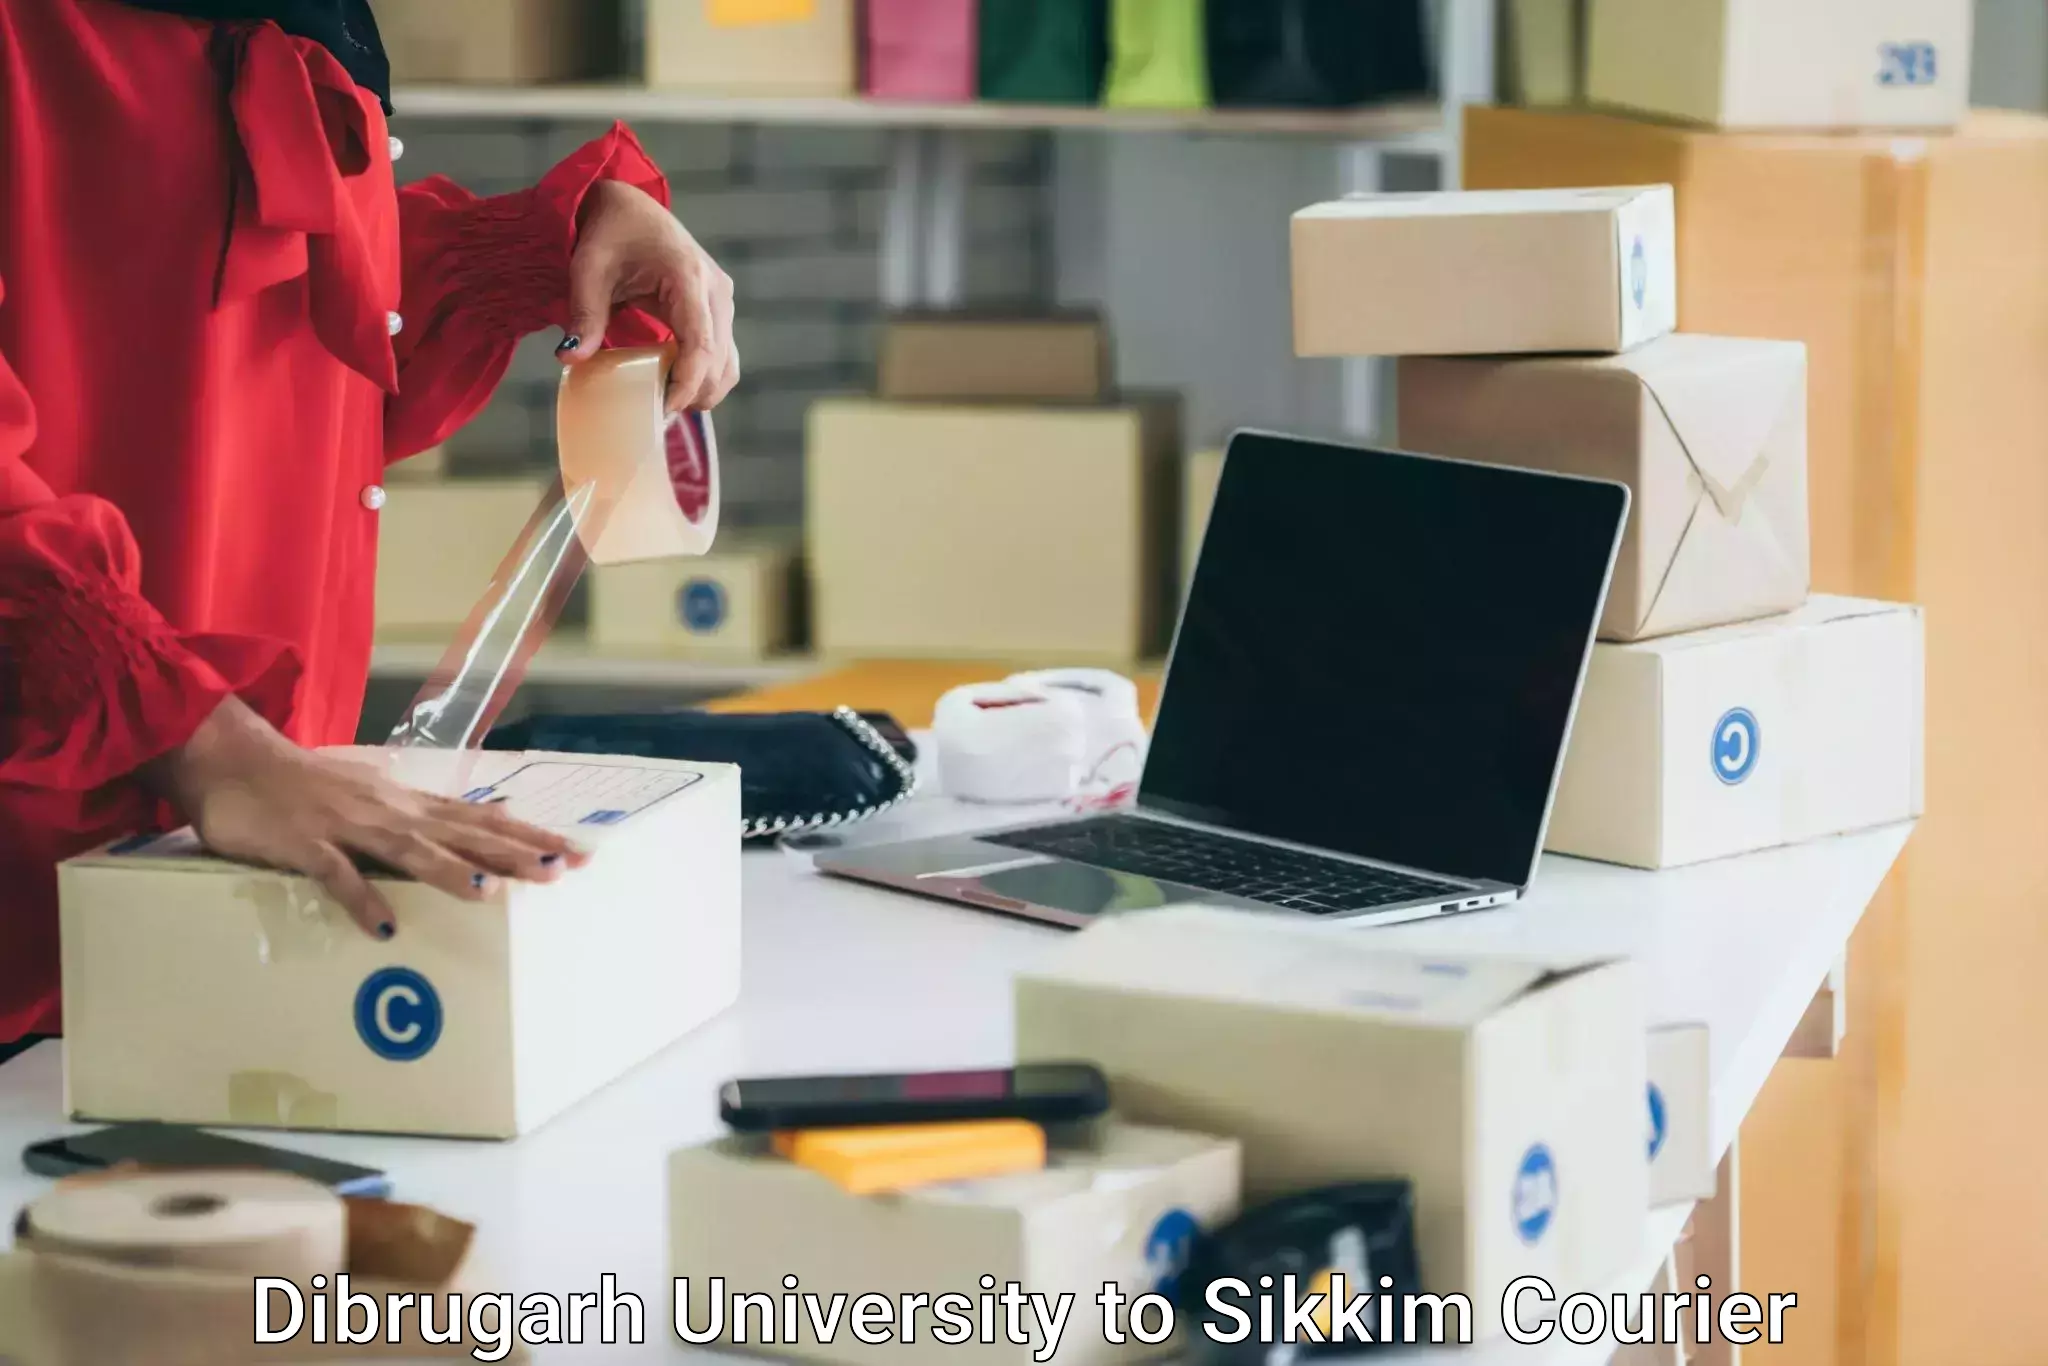 Full-service movers Dibrugarh University to East Sikkim